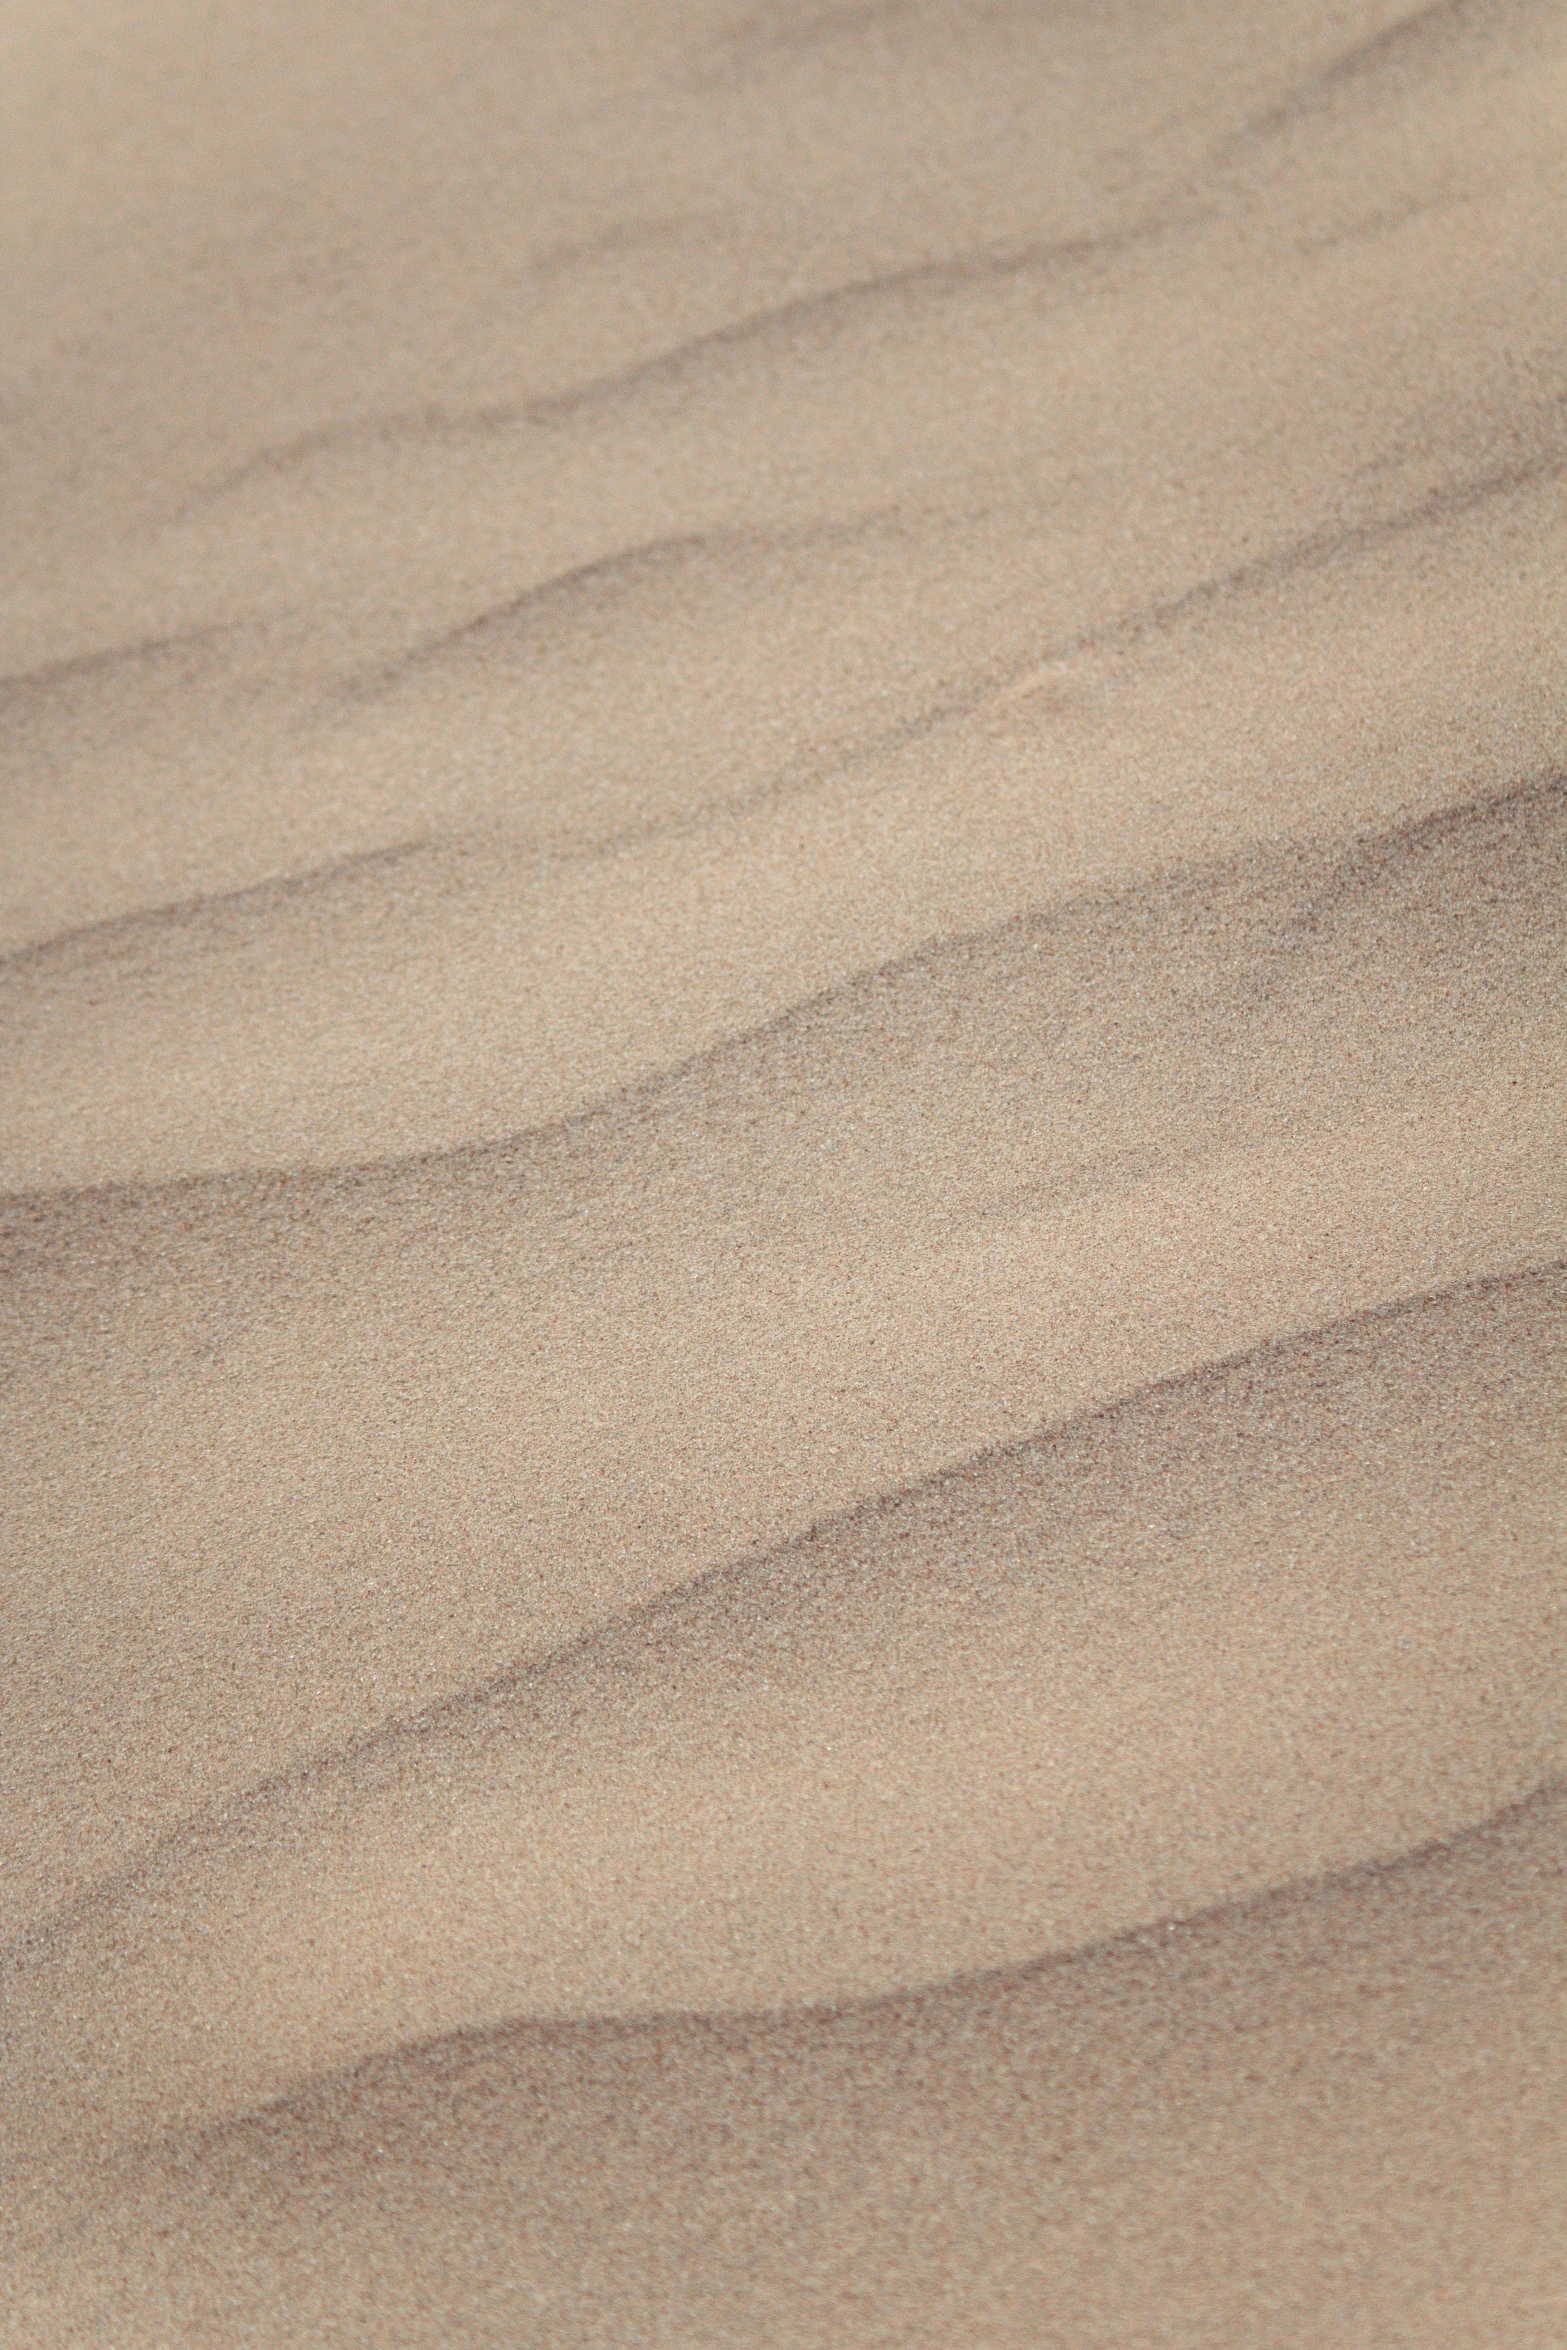 a bird standing on top of a sandy beach, subtle pattern, sand swirling, shot with sony alpha, close - up photograph